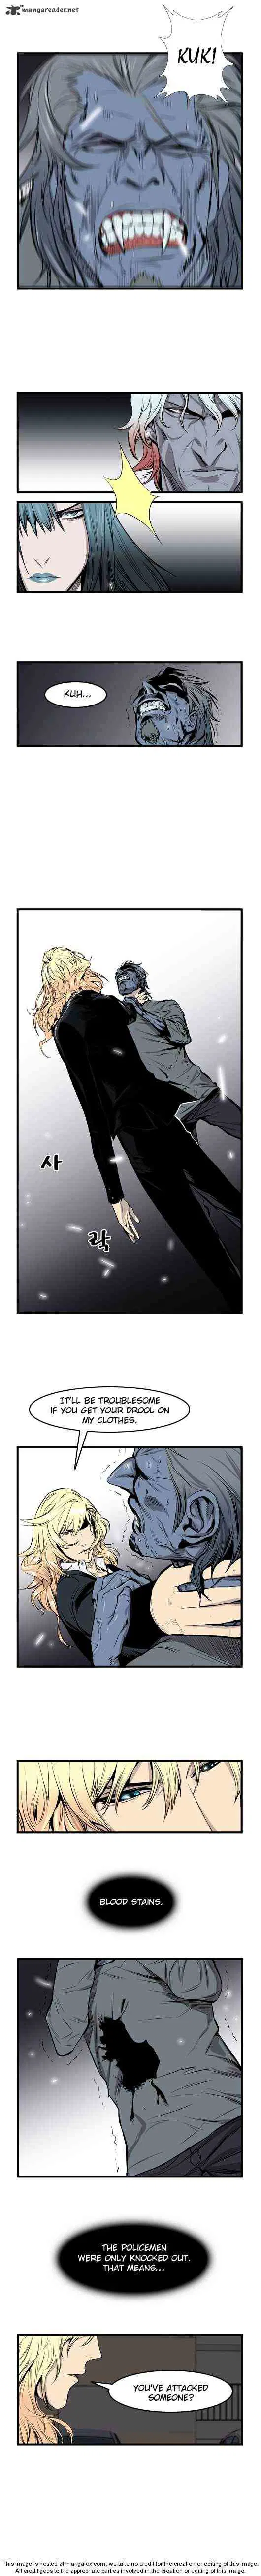 Noblesse Chapter 31 _ Chapters 31-45 page 86